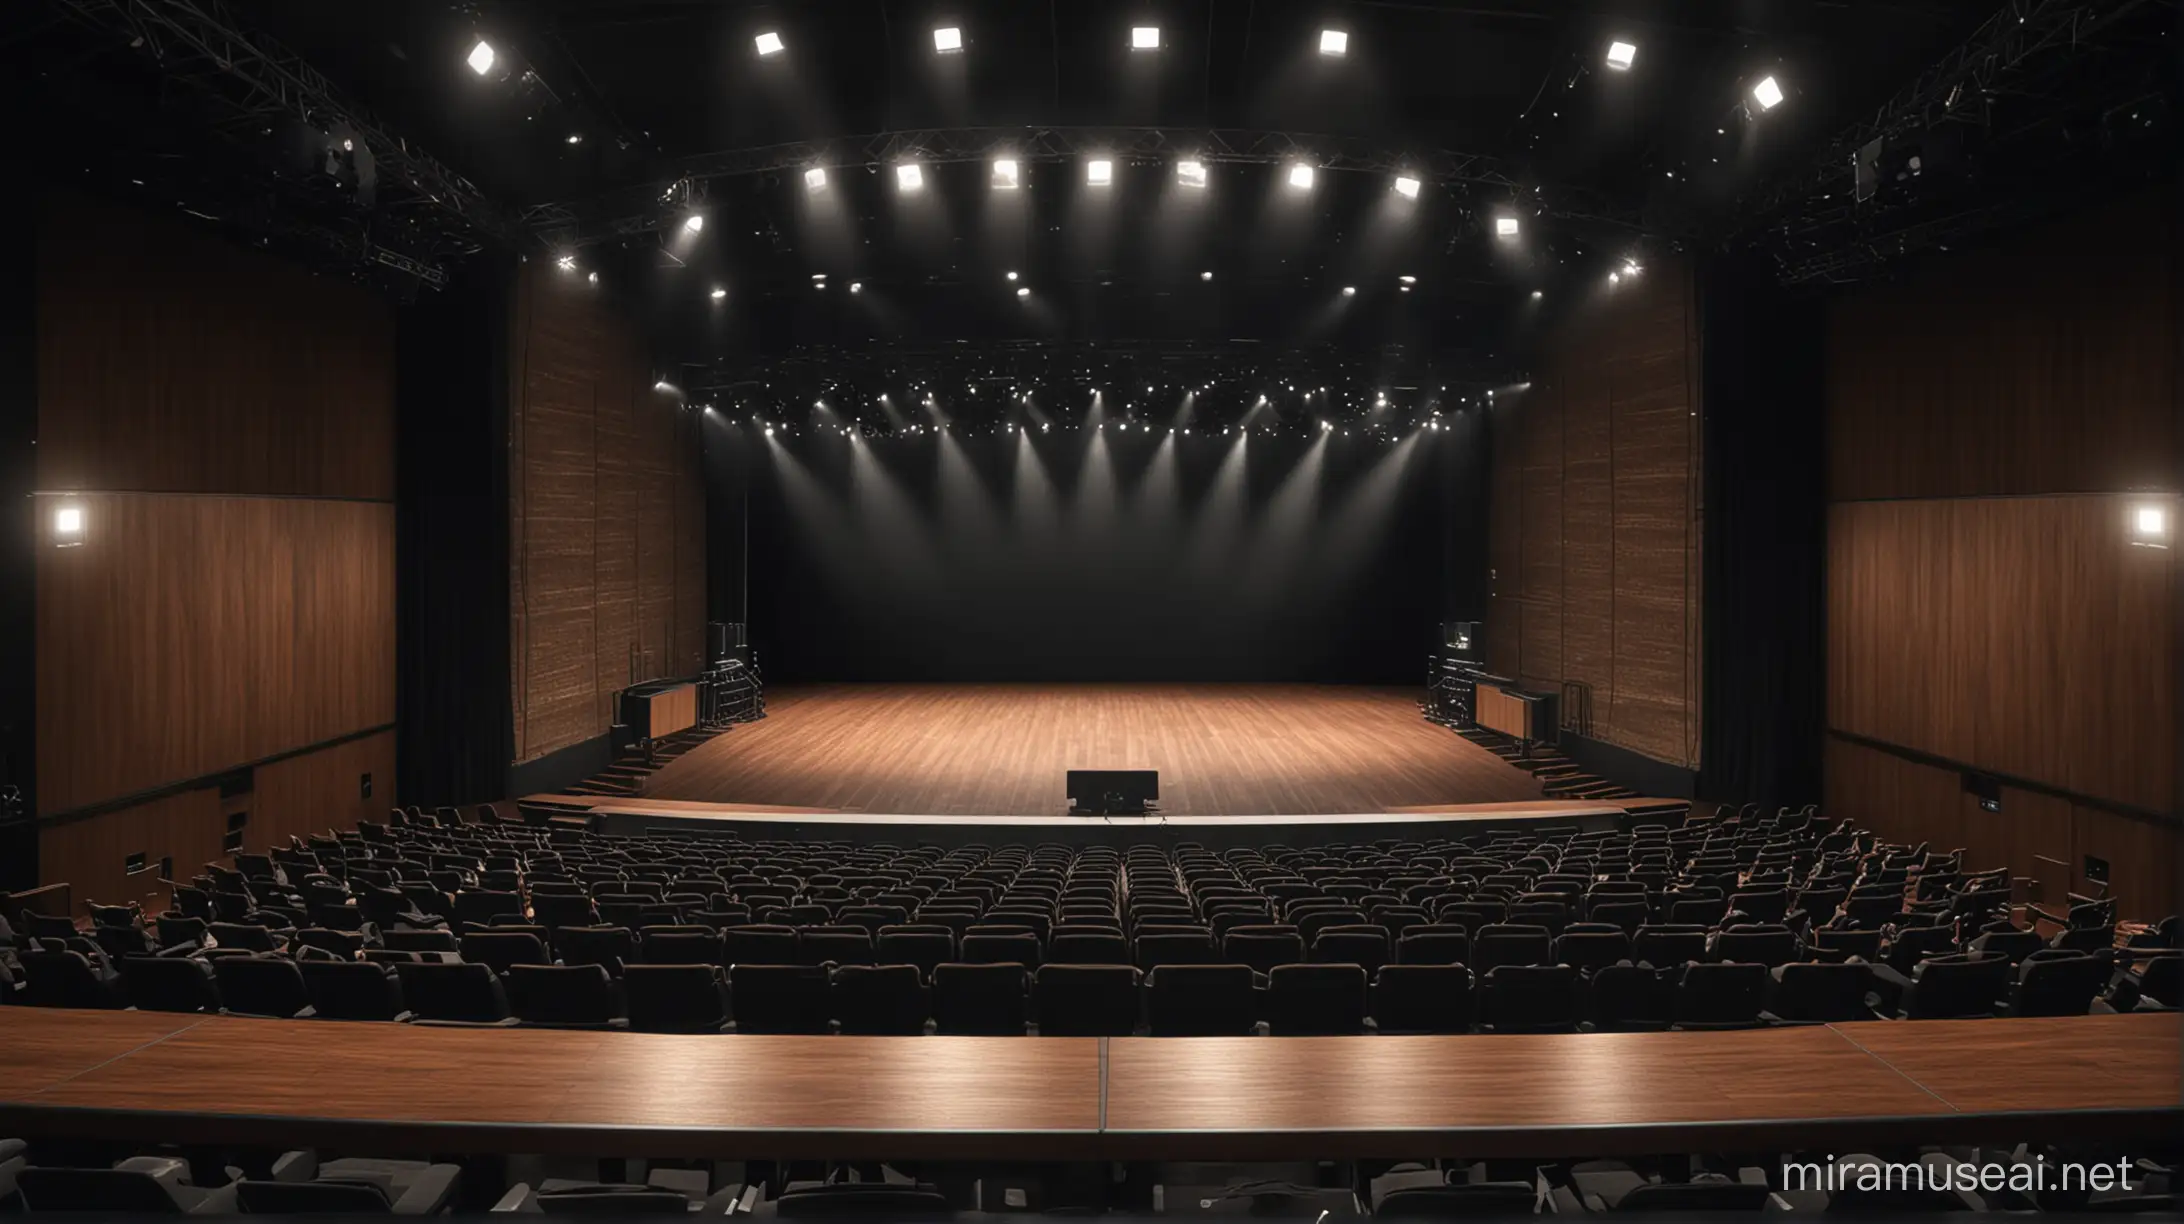 inside of an auditorium ,concert on the stage ,one point perspective to the stage.realstic